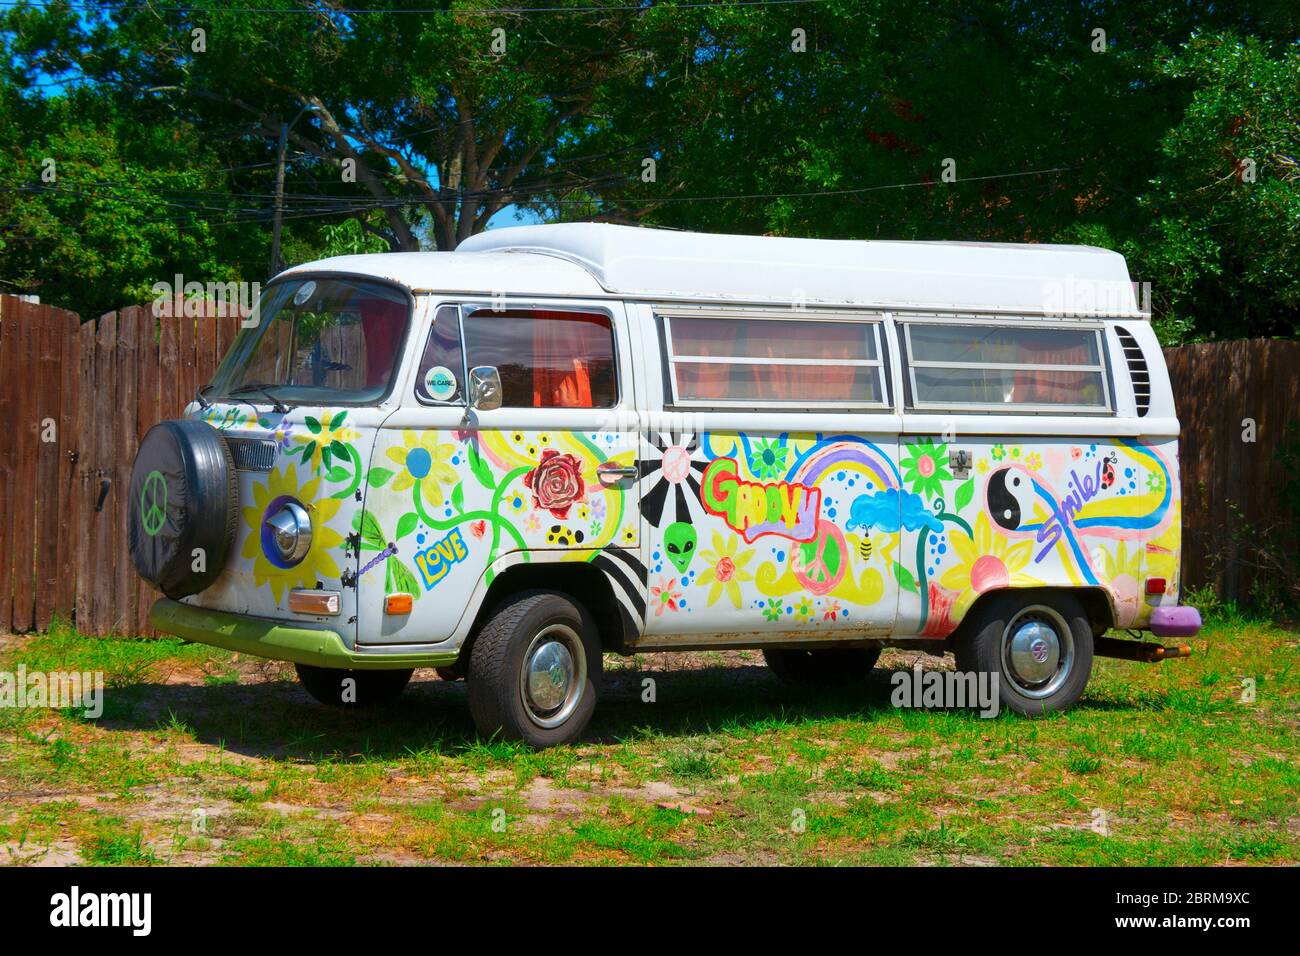 Saint Petersburg, Florida / USA - May 3, 2020: Antique hippie 1970 Volkswagen VW Type 2 camper van with love and groovy colorful artwork hand painted Stock Photo